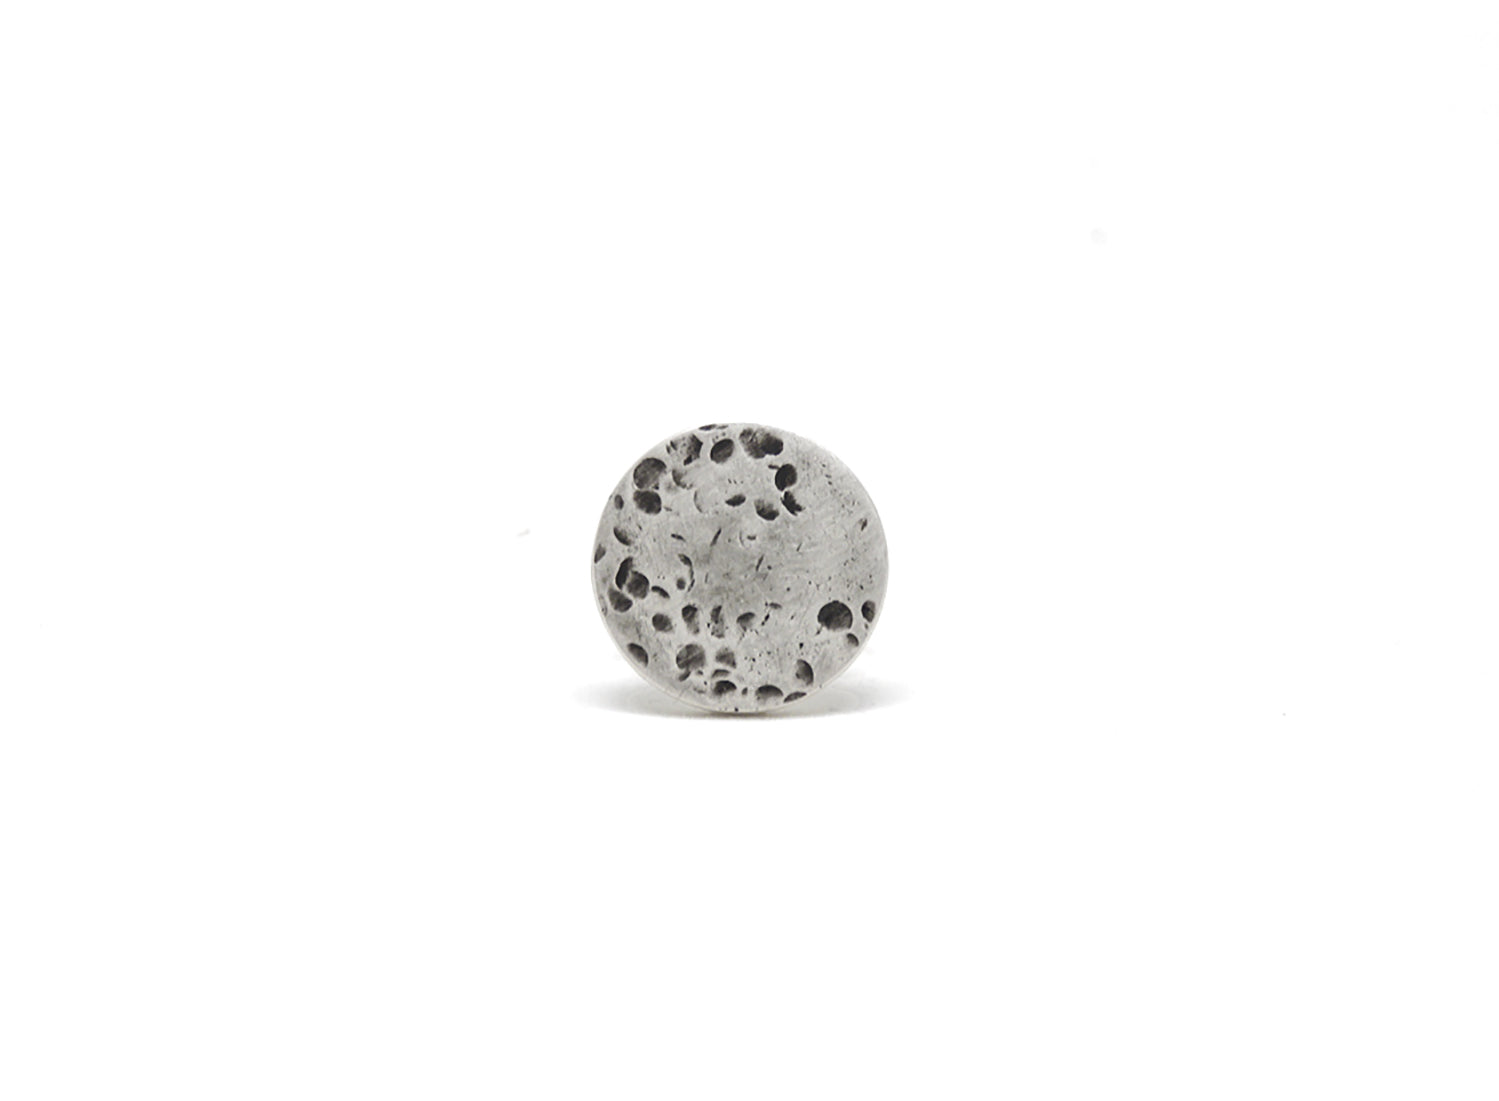 llayers jewelry ring mercury silver textured bague lunaire argent minimale made in france